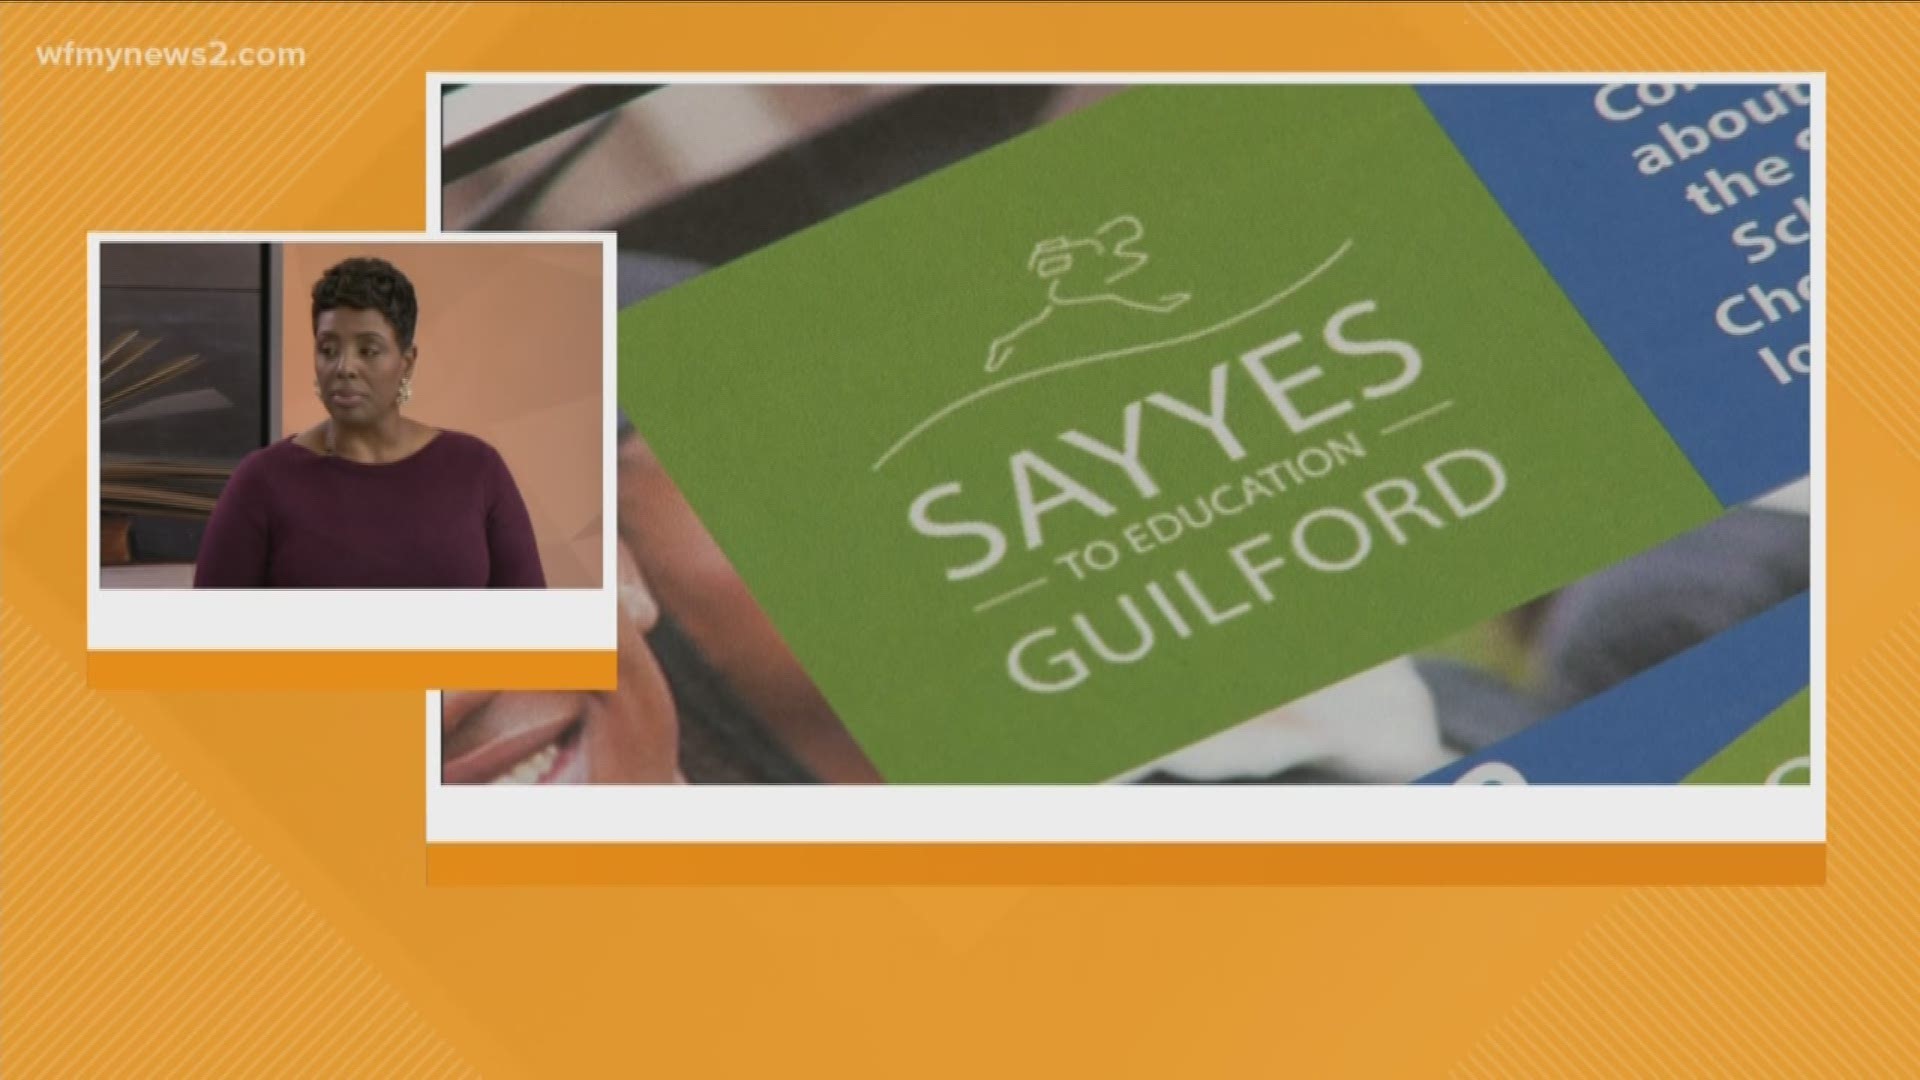 More students are saying yes to college and scholarships thanks to Say Yes, Guilford!